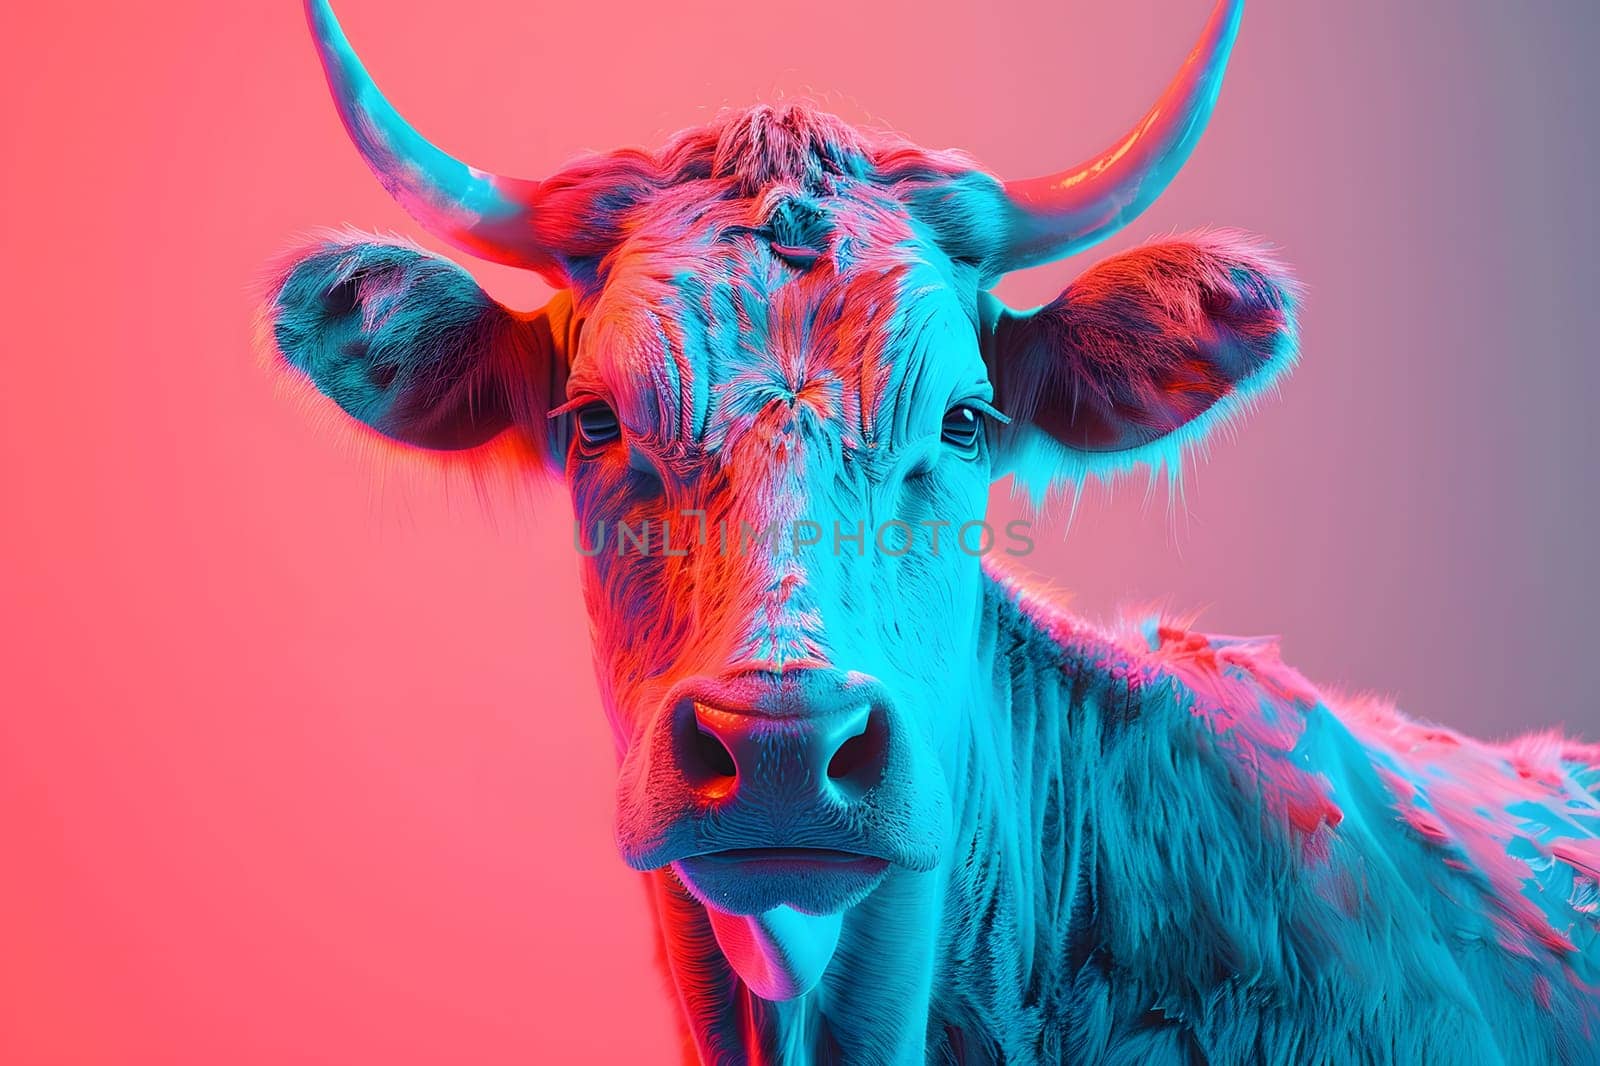 An artistic close up of a bull with horns, snout, and working animal sleeve, set against a vibrant red and blue sky background. An entertaining depiction of a powerful creature